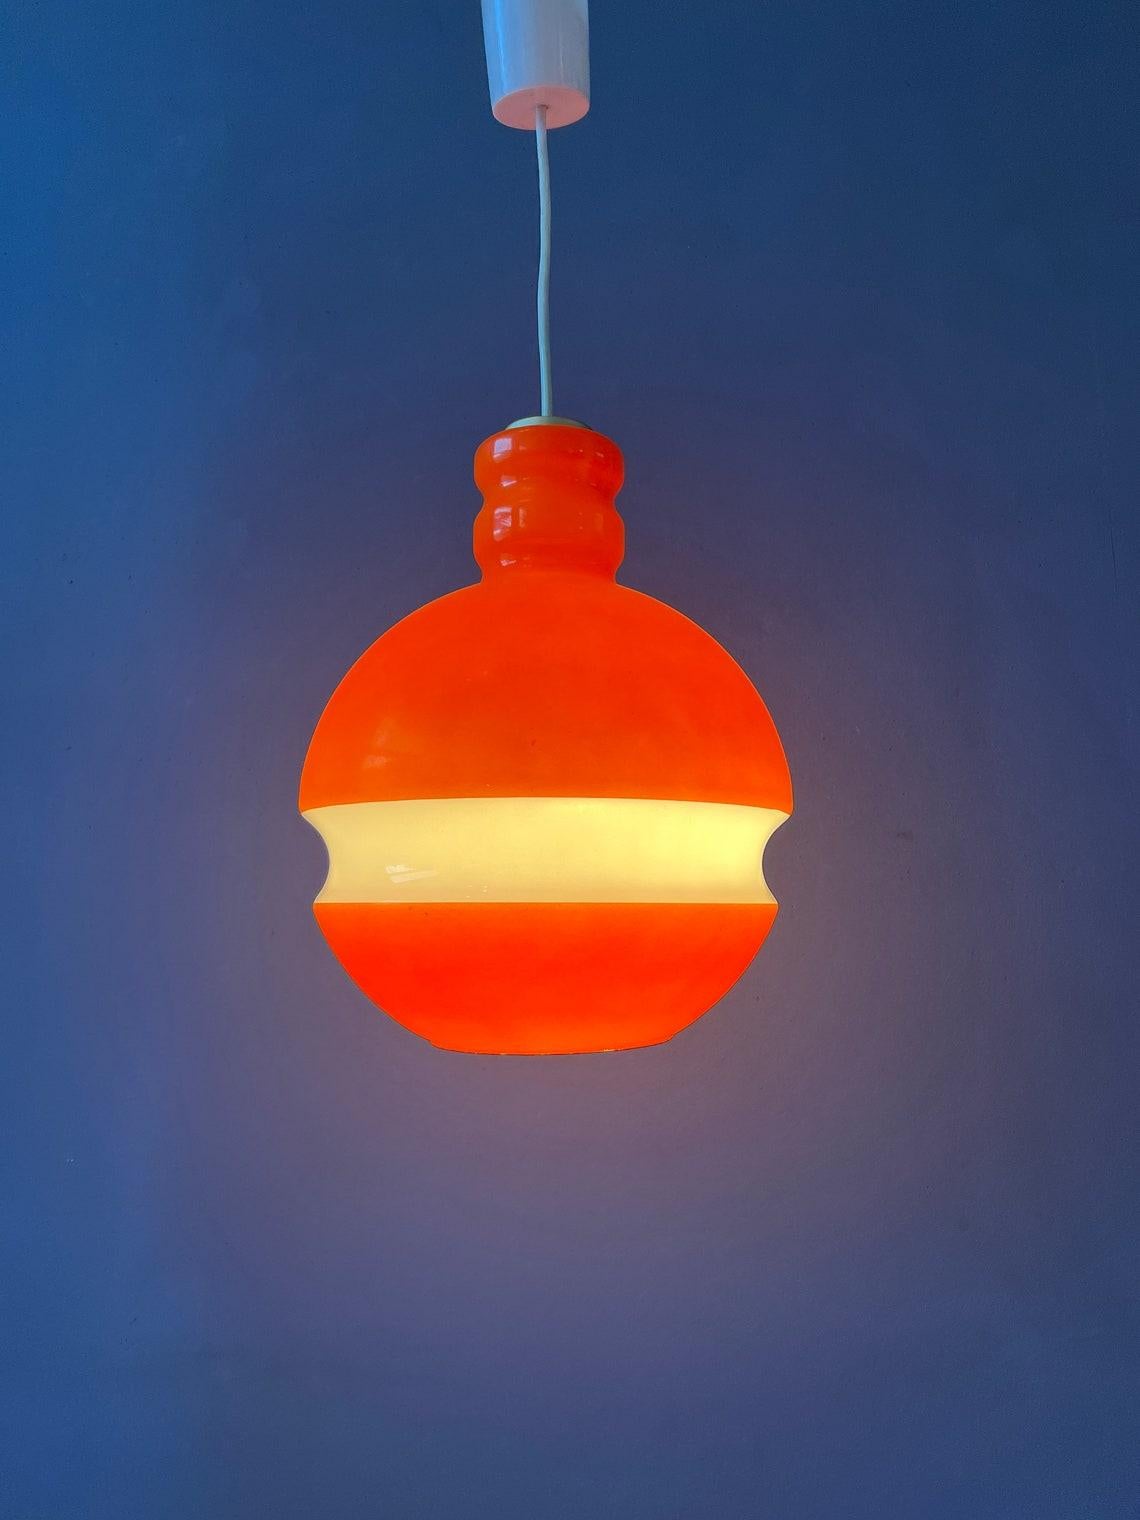 Orange Peill & Putzler space age glass pendant lamp. The orange and white parts together produce an amazing light effect. The lamp requires one E27/26 lightbulb.

Additional information:
Materials: Glass, metal
Period: 1970s
Dimensions:ø: 24